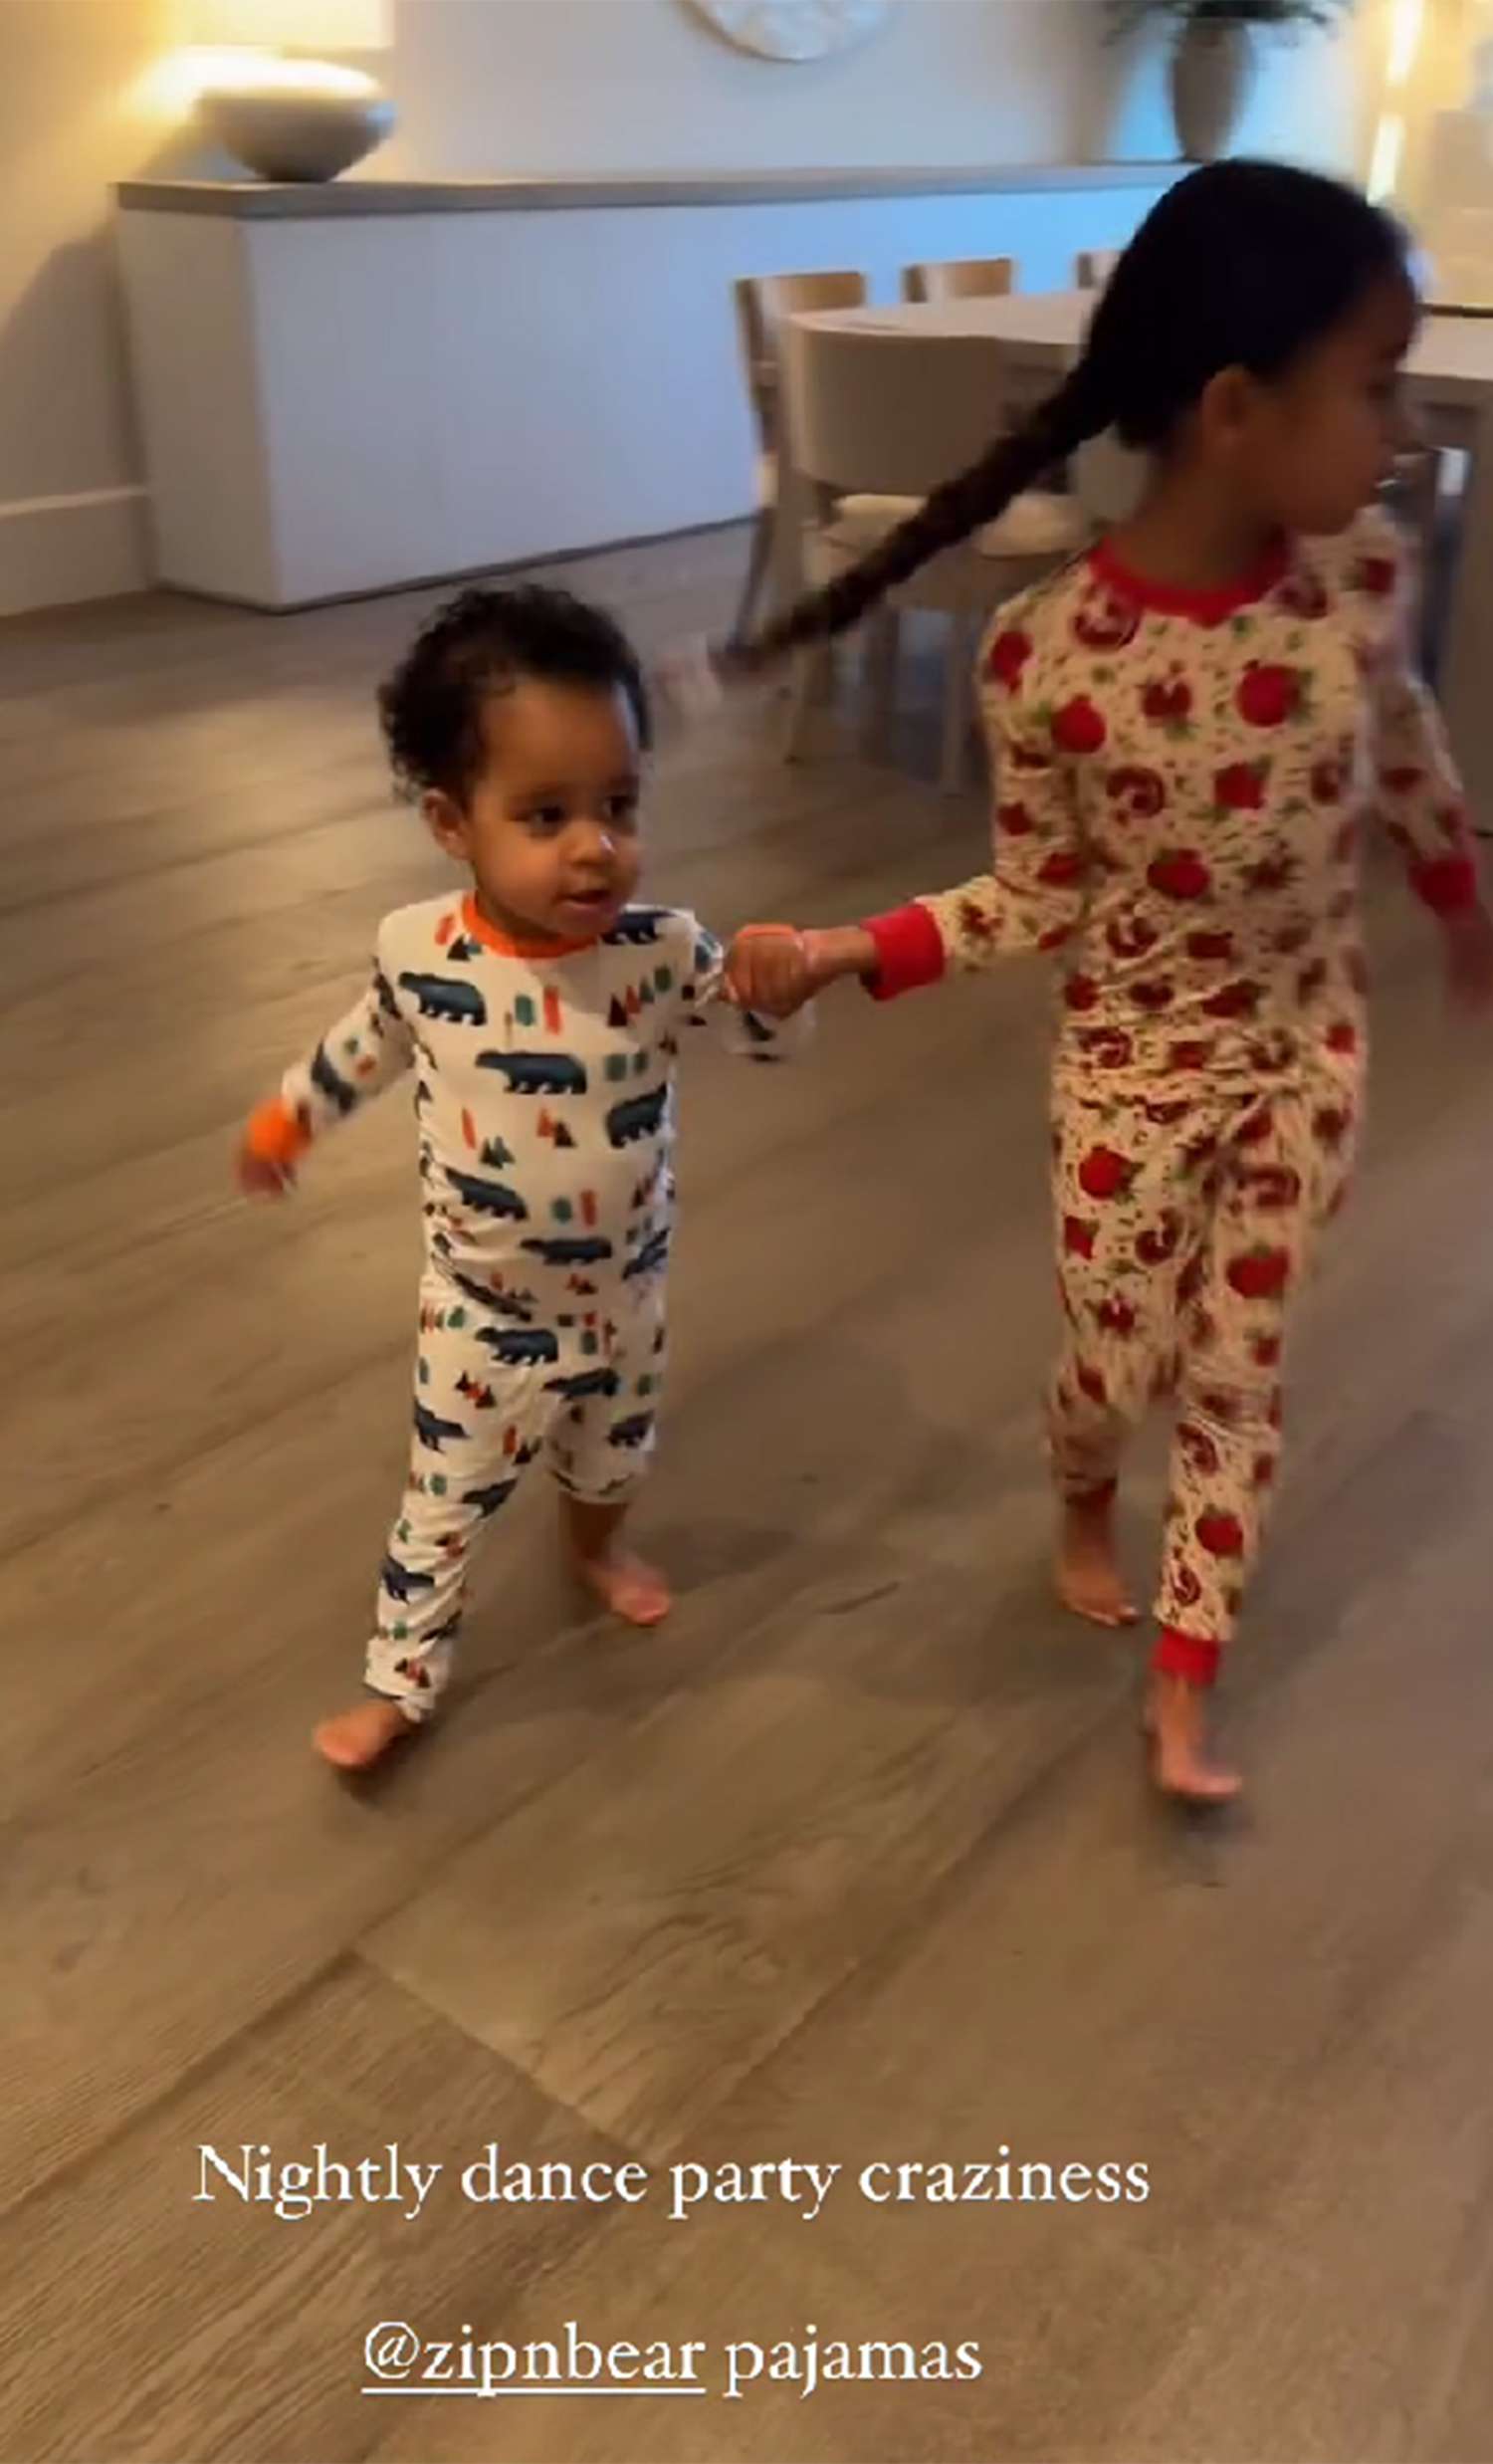 KhloÃ© Kardashian Shares Video of Nighty Dance Party Craziness with Pajama Wearing True, Tatum and Cousin Dream